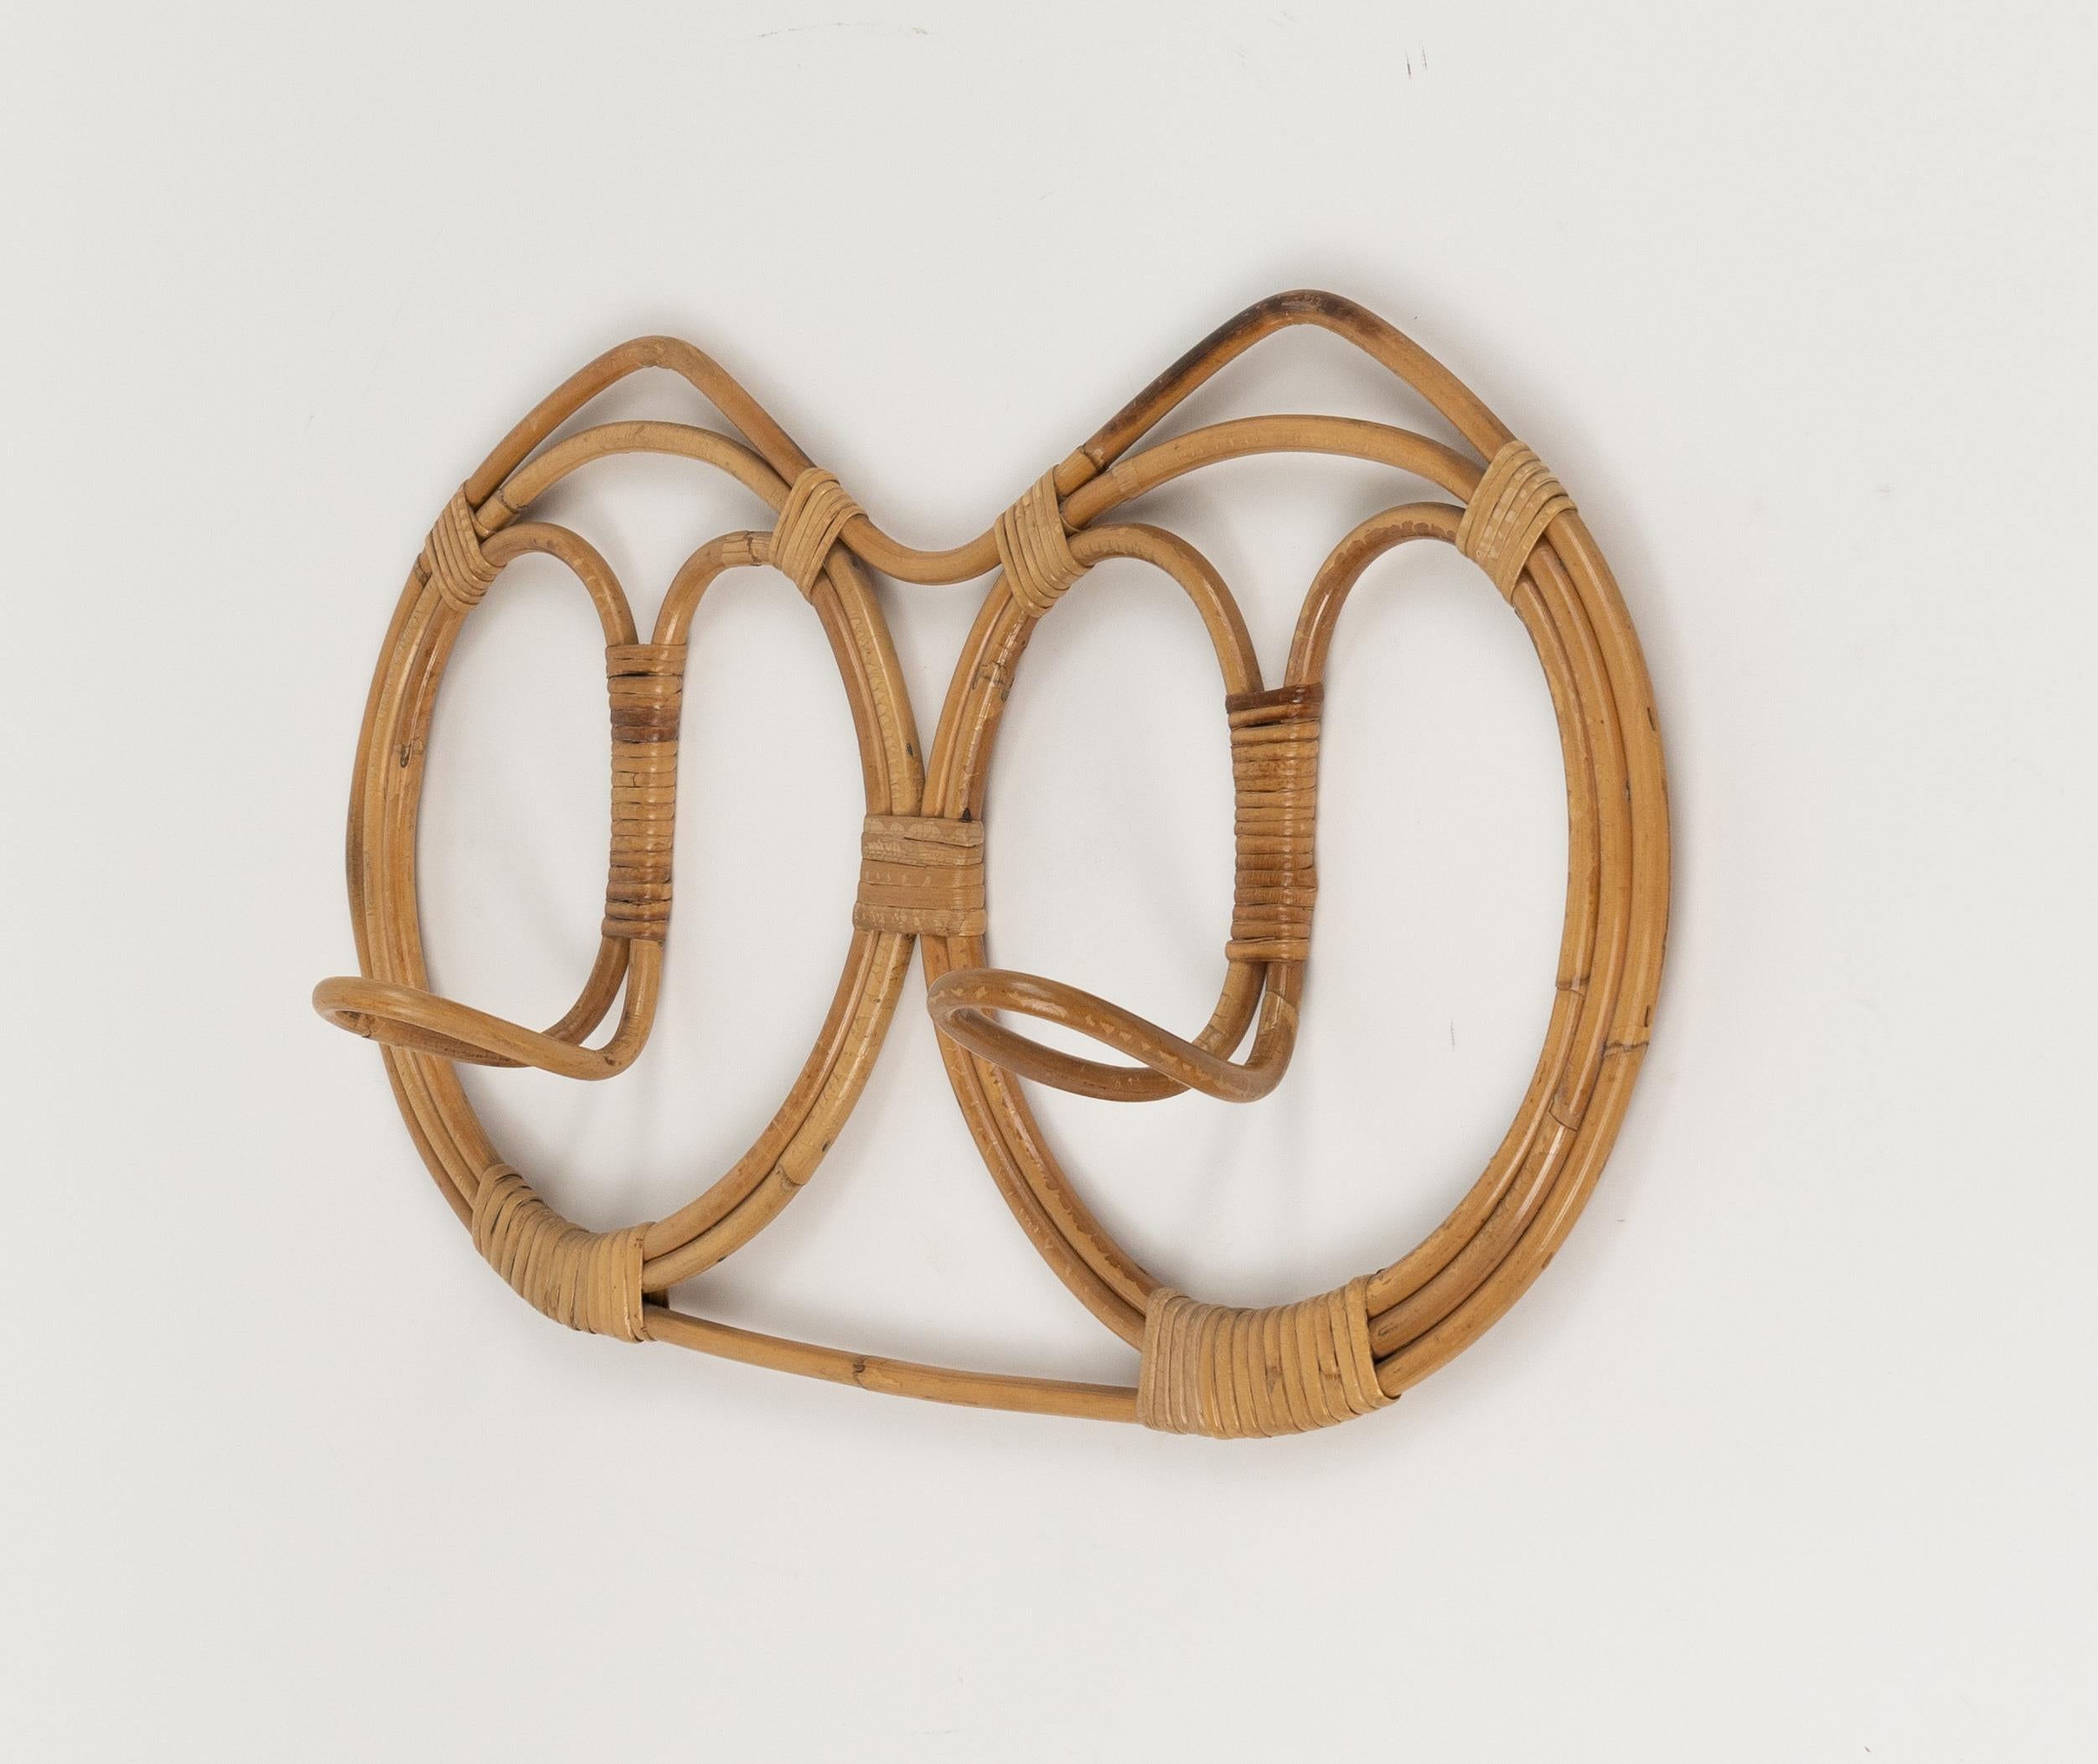 Midcentury Wall Coat Rack in Bamboo and Rattan by Franco Albini, Italy 1960s For Sale 7